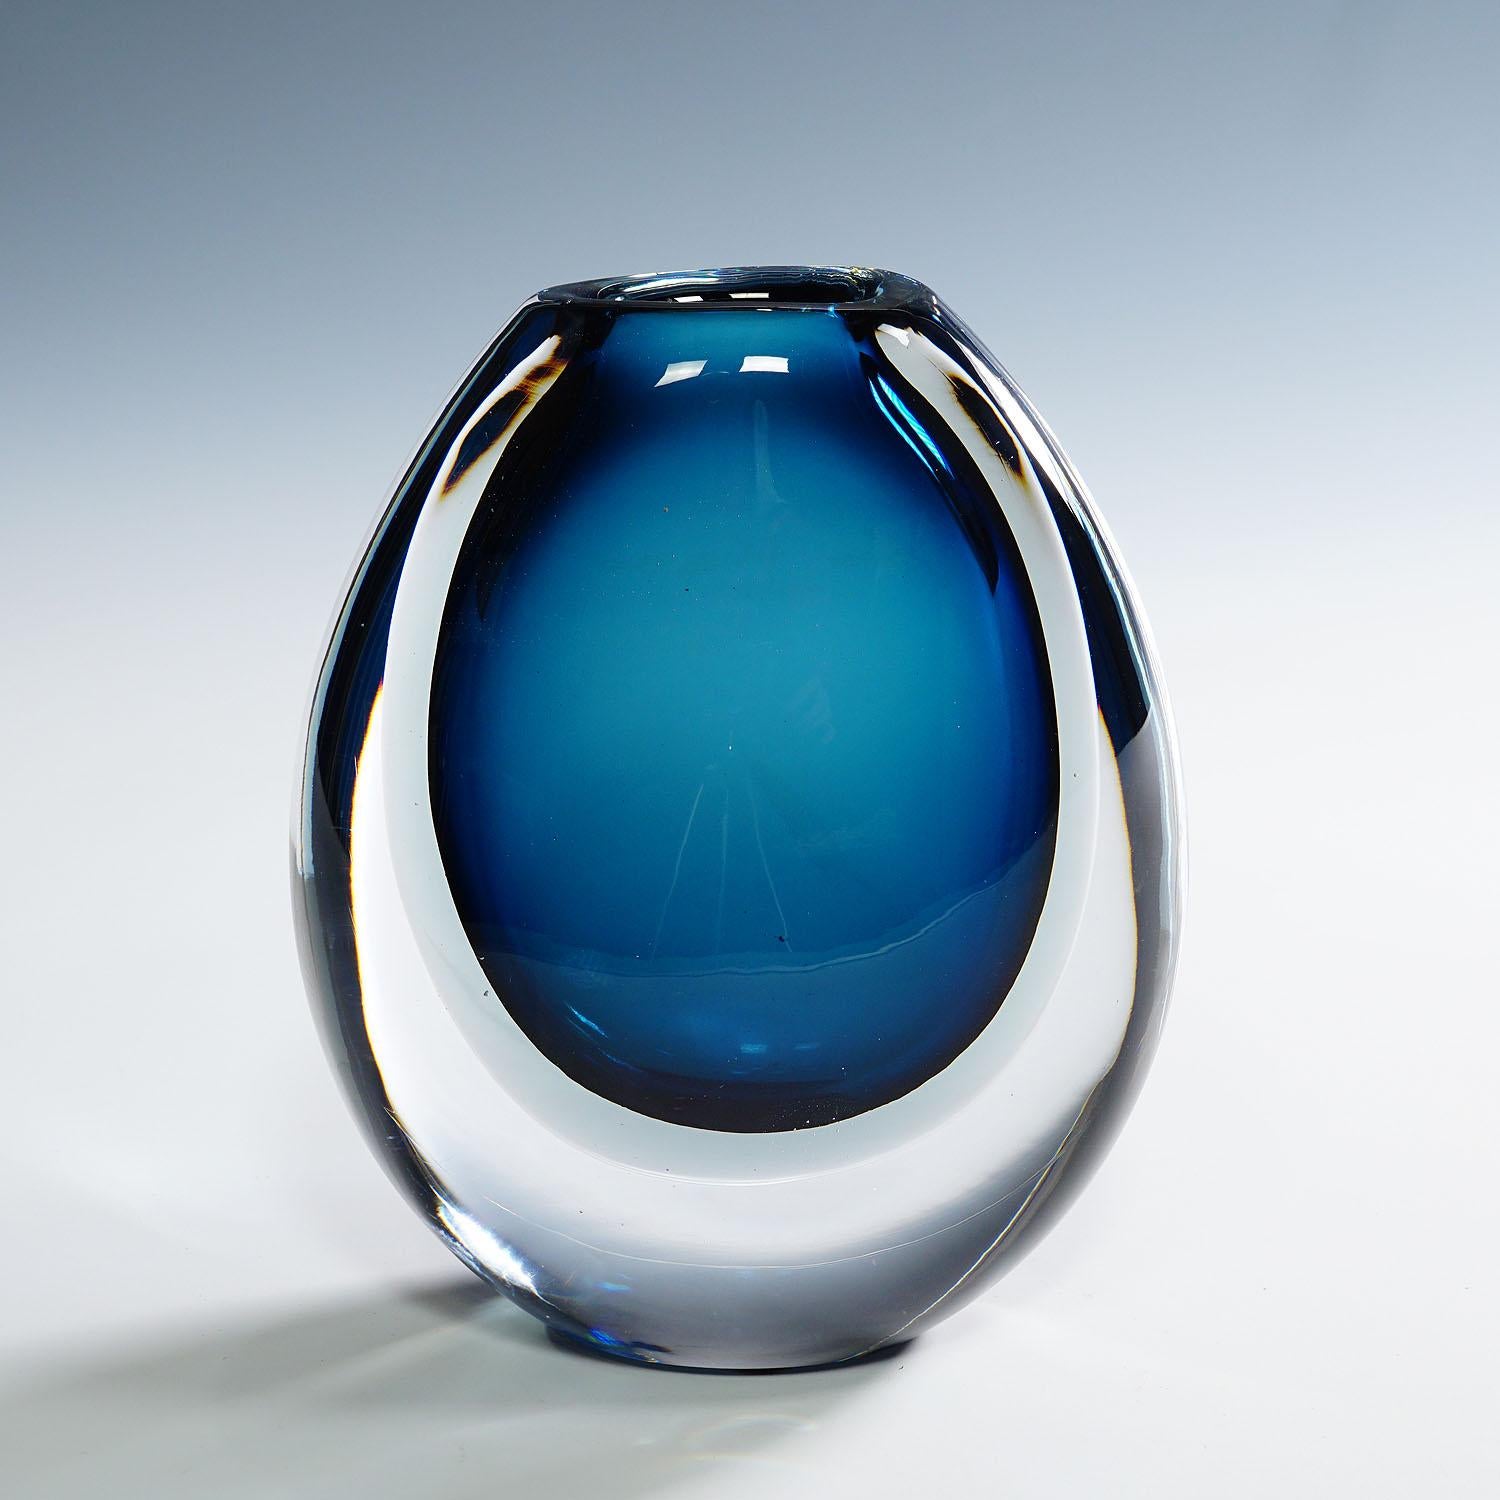 Vase with Blue and Grey Layers, Vicke Lindstrand for Kosta 1950s

A vintage art glass vase designed by Vicke Lindstrand and manufactured by Kosta Glasbruk ca. 1950s. The vase features blue and a grey glass layers with clear glass overlay. The vase